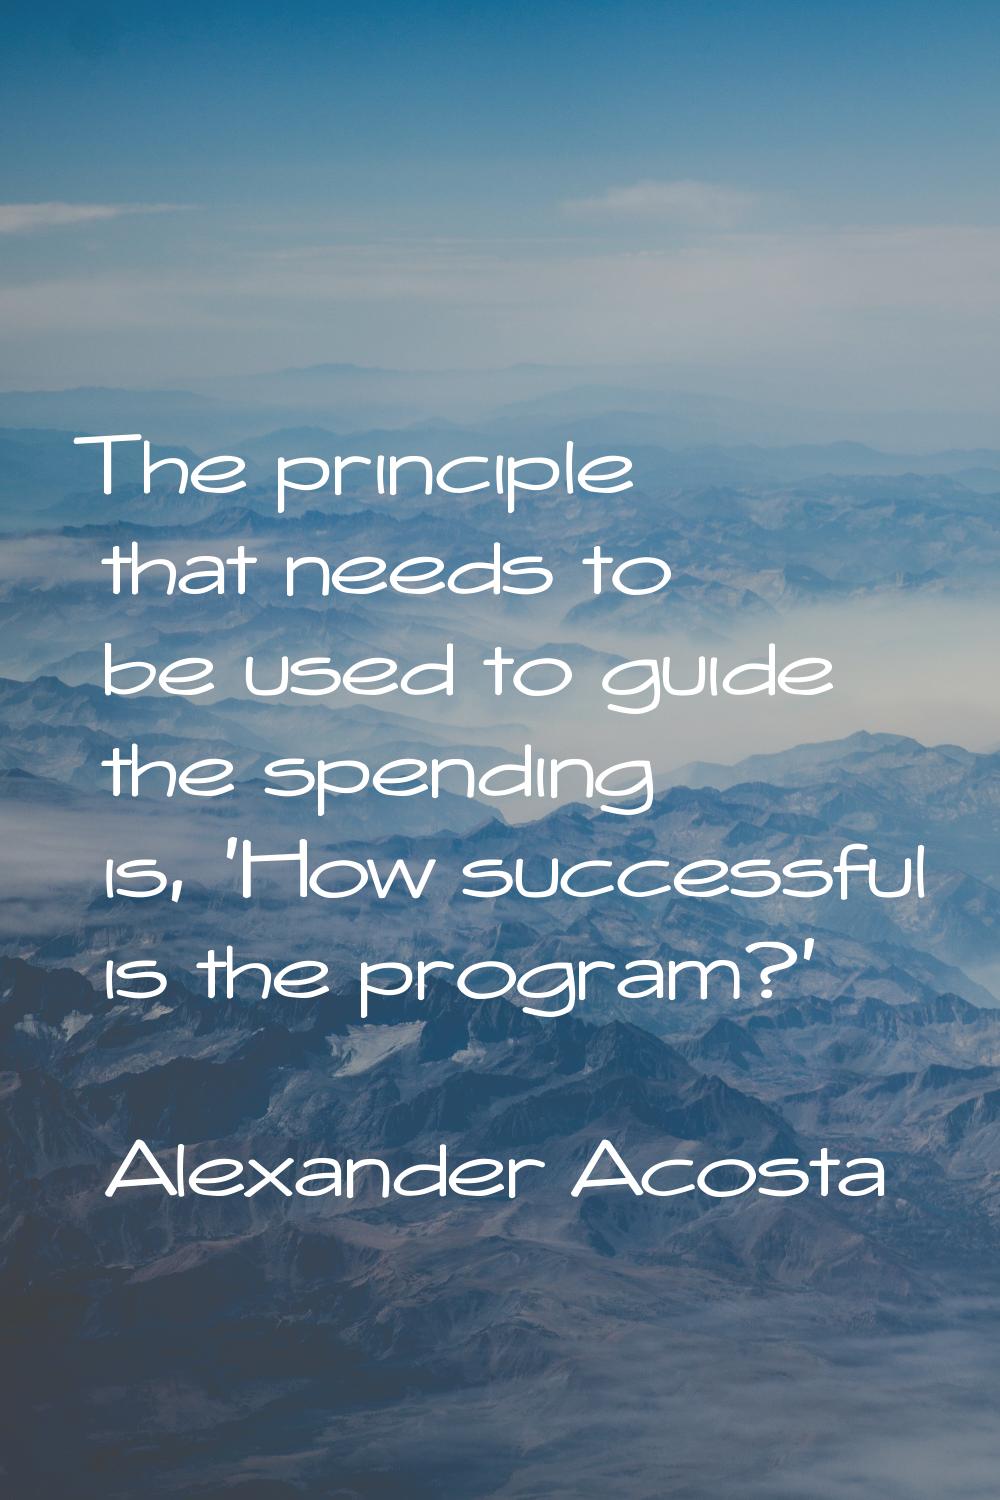 The principle that needs to be used to guide the spending is, 'How successful is the program?'